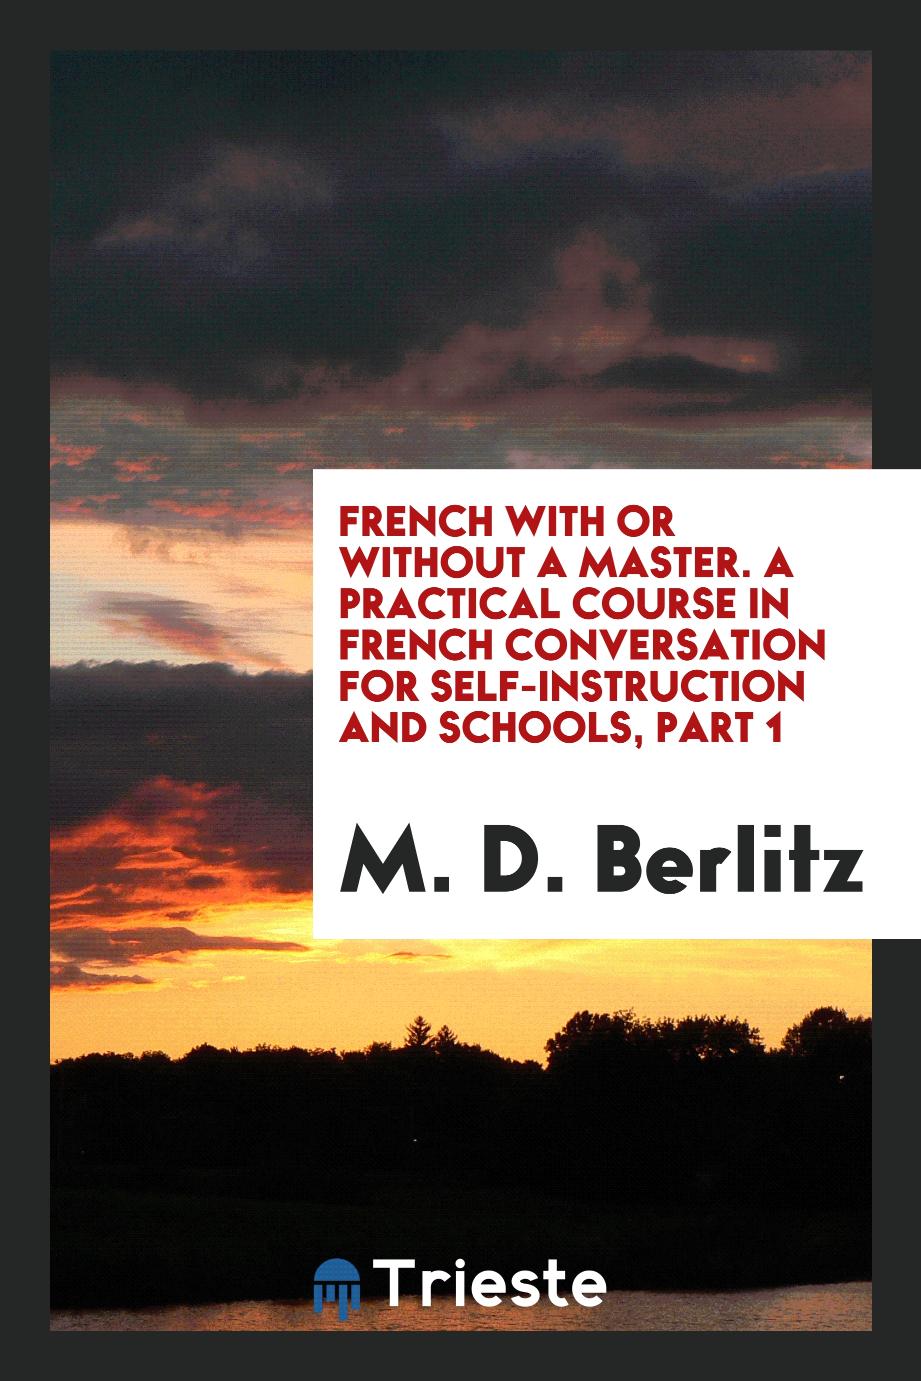 French with or Without a Master. A Practical Course in French Conversation for Self-Instruction and Schools, Part 1